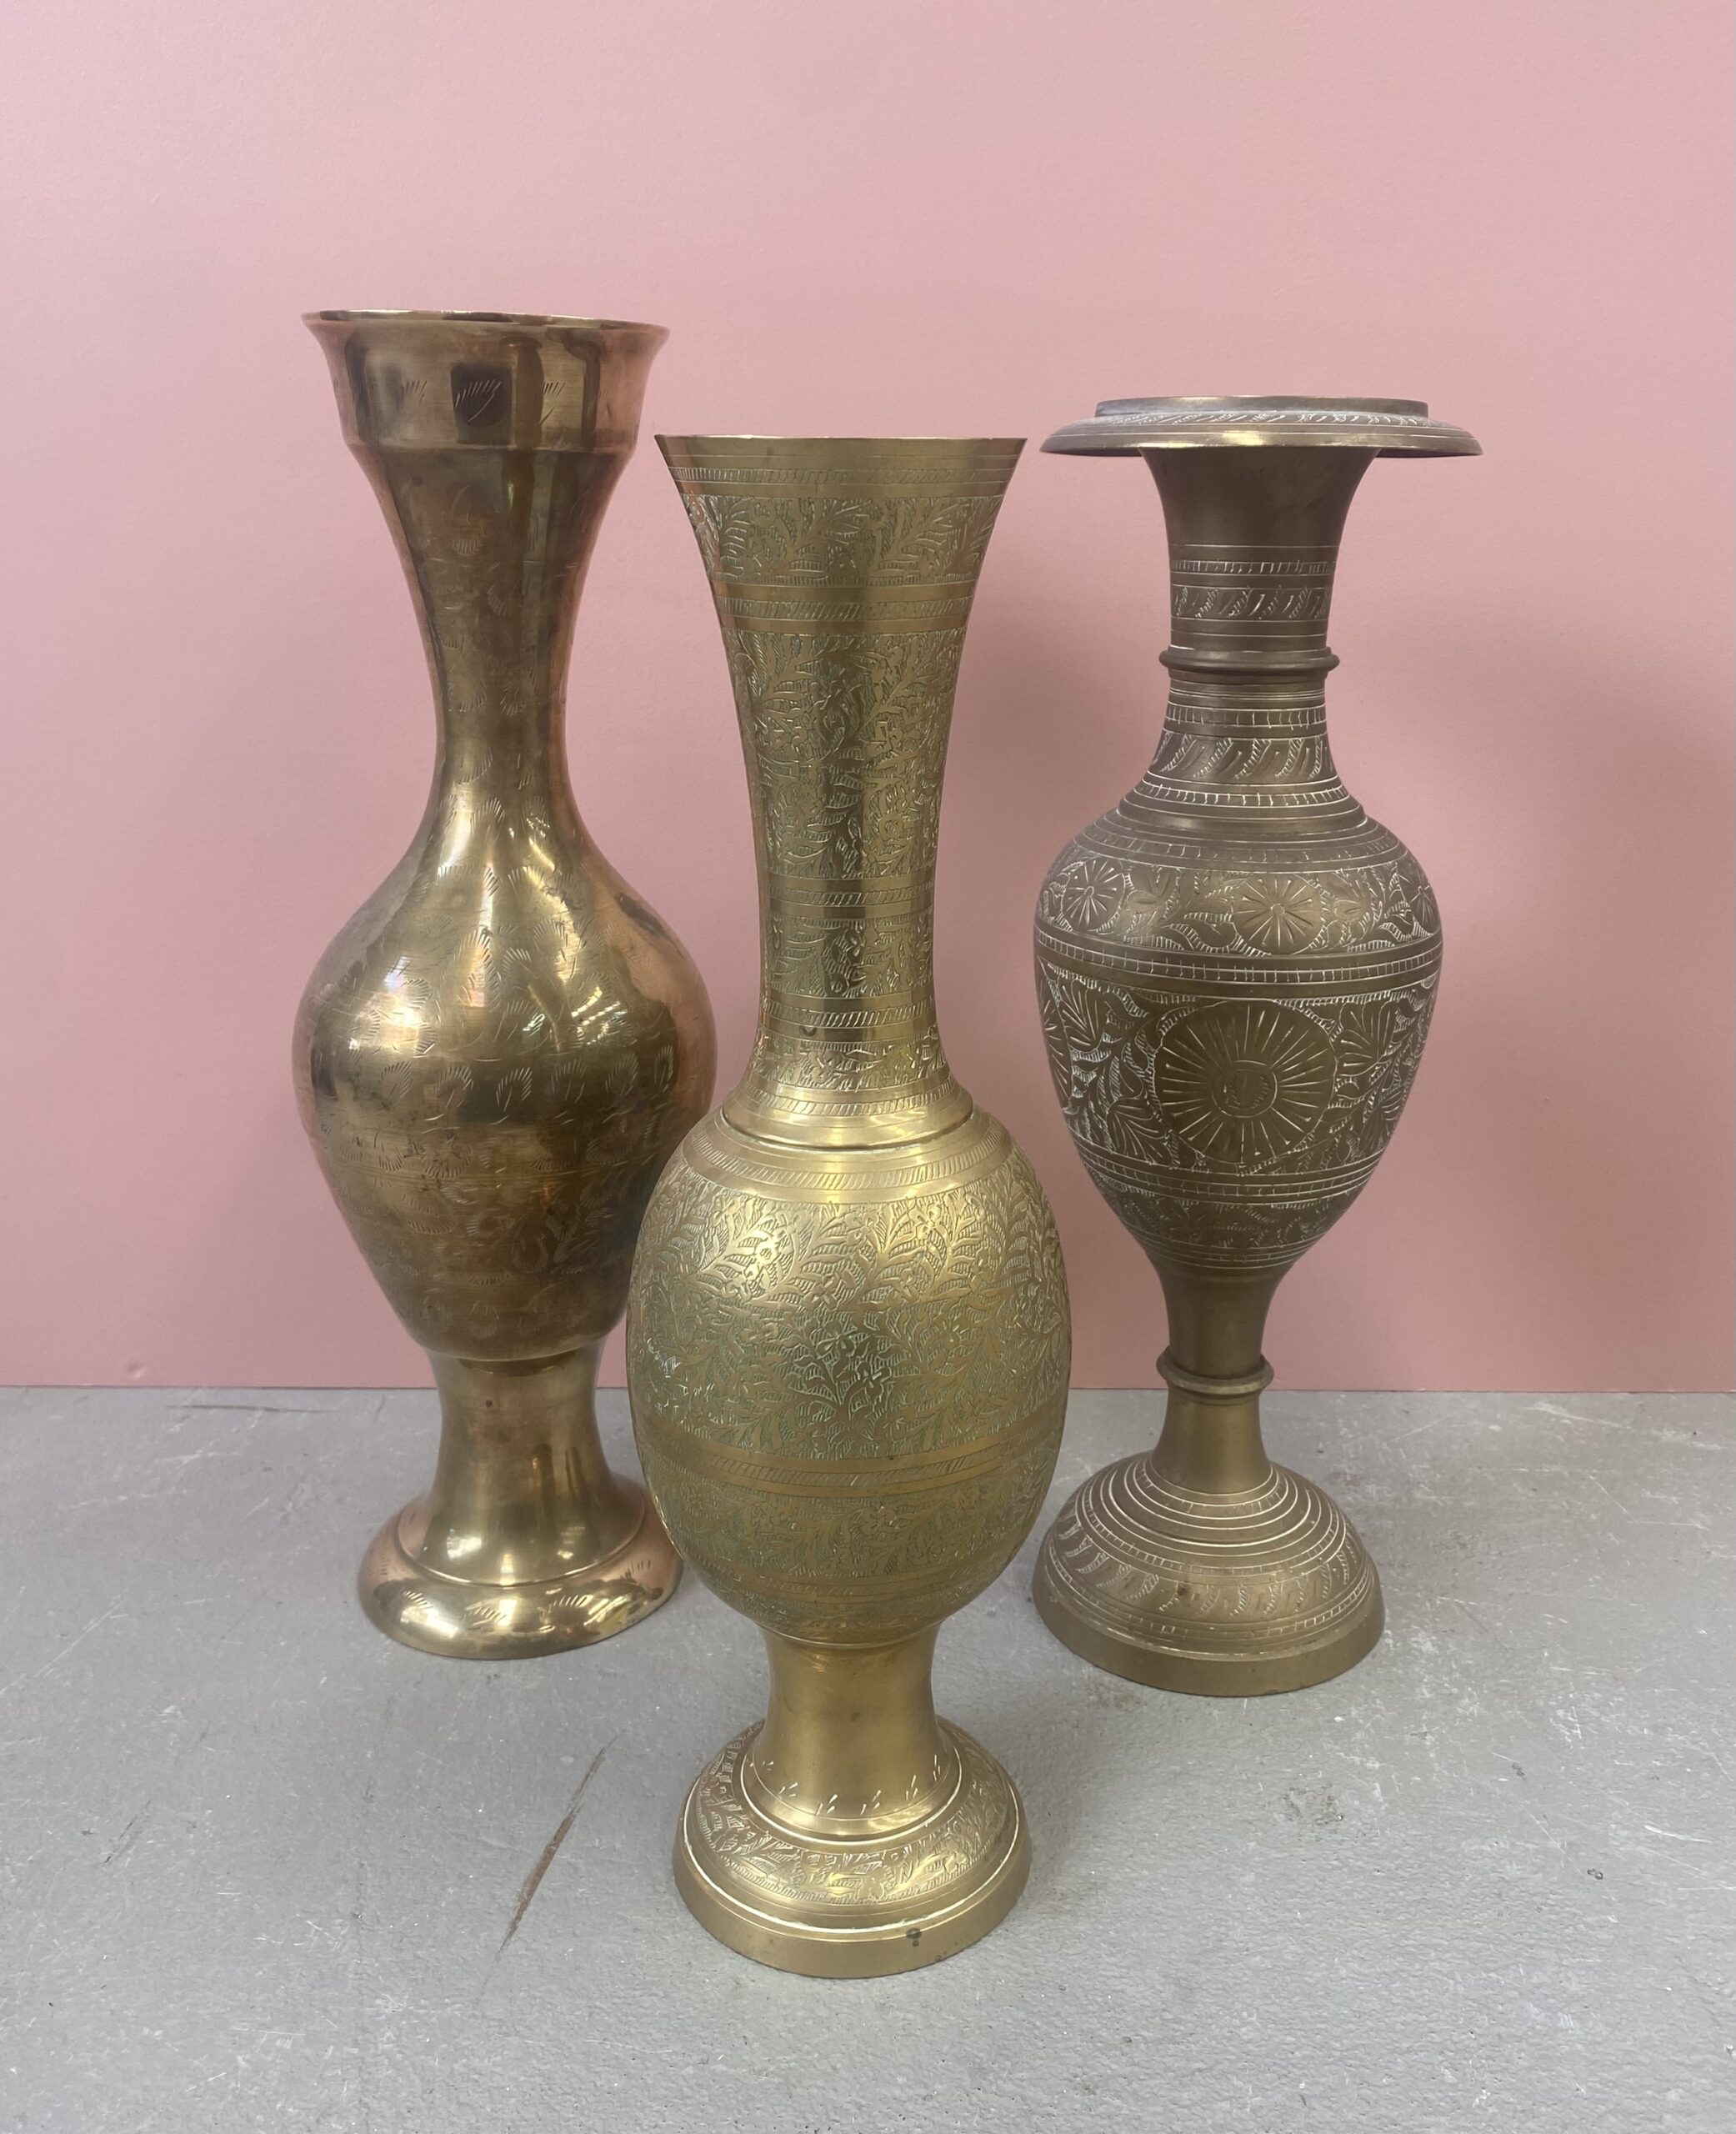 Medium Brass Vases Set of 3 - A Day to Remember Event Hire